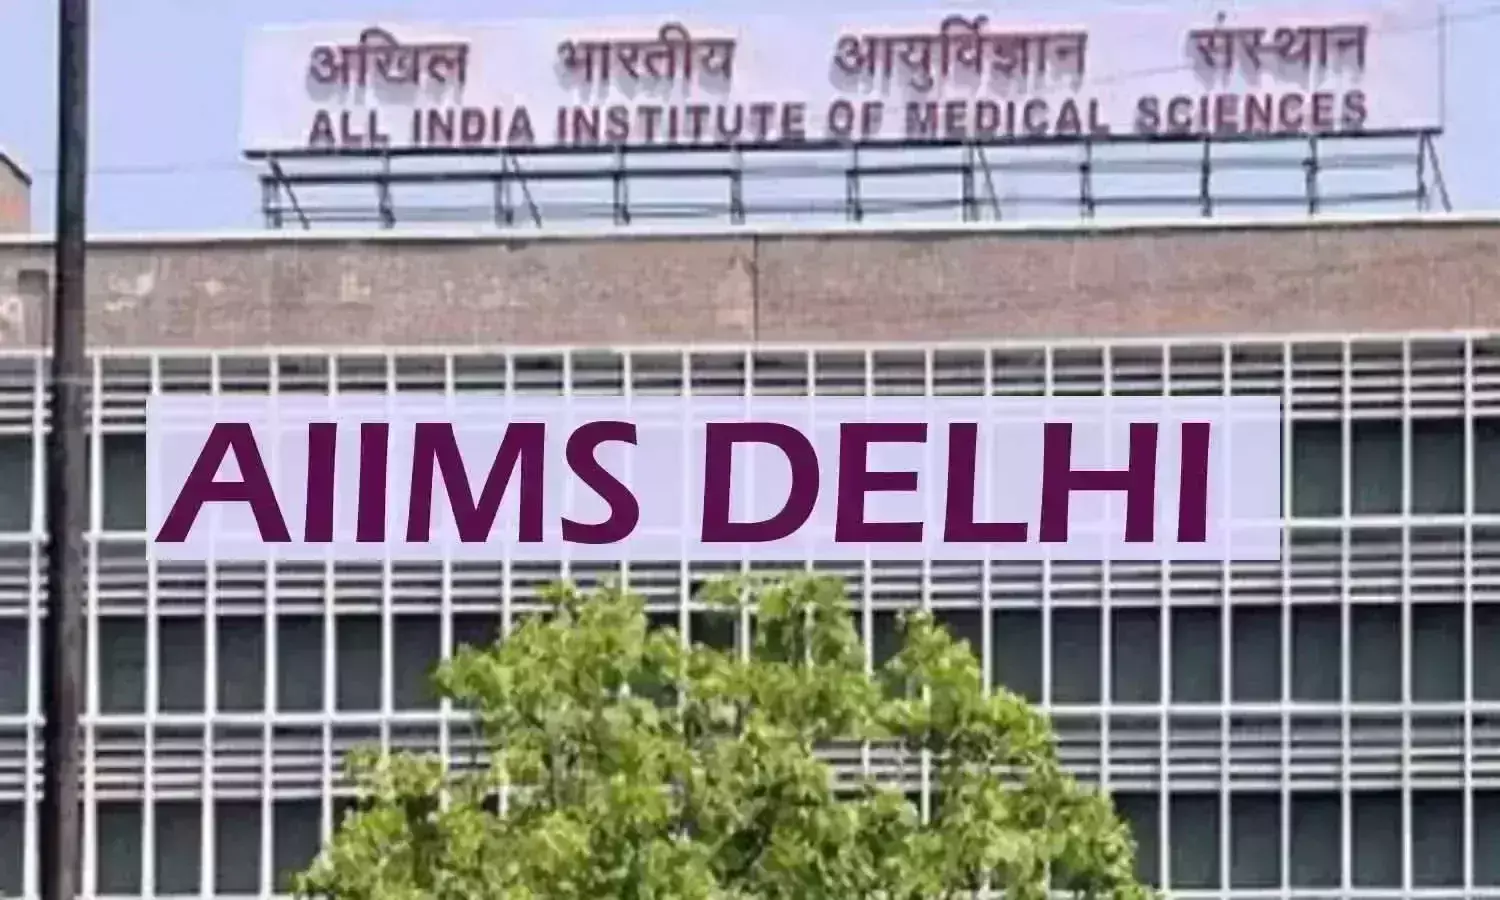 BSc, MSc Admissions at AIIMS: Dates for Final Status, Admit Card, exams Rescheduled, details